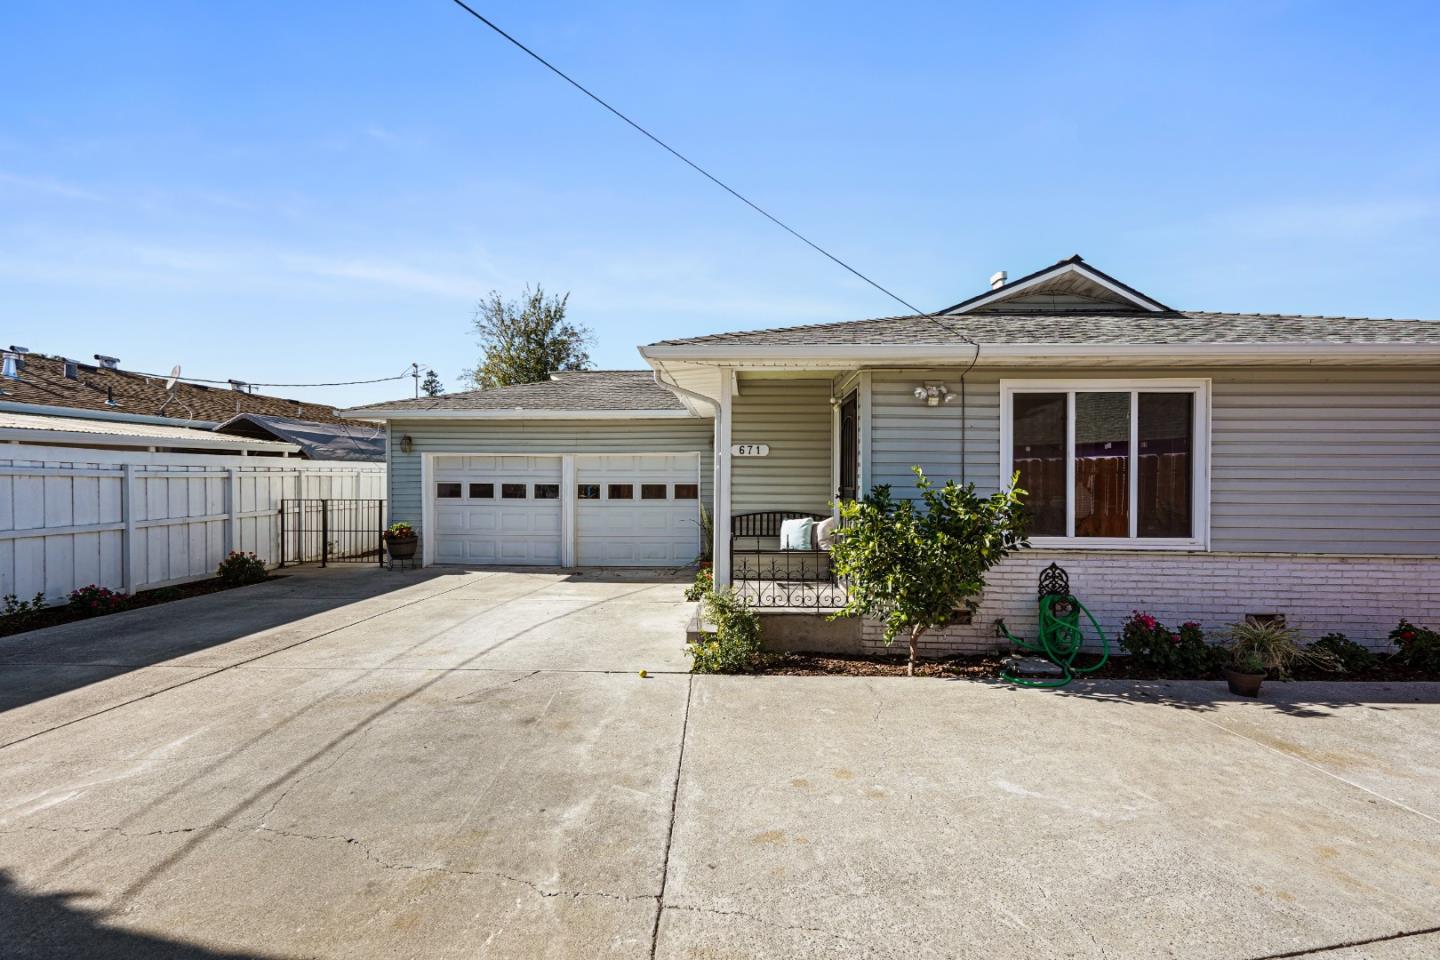 VERSATILITY ABOUNDS. This 3 bedroom 3 bathroom home has tons to offer with multiple design options. The property can accommodate two separate units, 1 bed 1 bath (669 sq. ft.) and 2 bed, 2 bath (1,115 sq. ft.) or combined to create a 3/3 at 1,784 sq. ft. The home is light filled and spacious. The bathrooms and bedrooms have been updated and lovingly maintained. Nestled at the end of a court ensures privacy and quiet, along with ample parking. Come create your perfect living space!! Just minutes to all Redwood City amenities, parks, downtown, Cal Train, HWY 101, Costco and Sigona's Market!